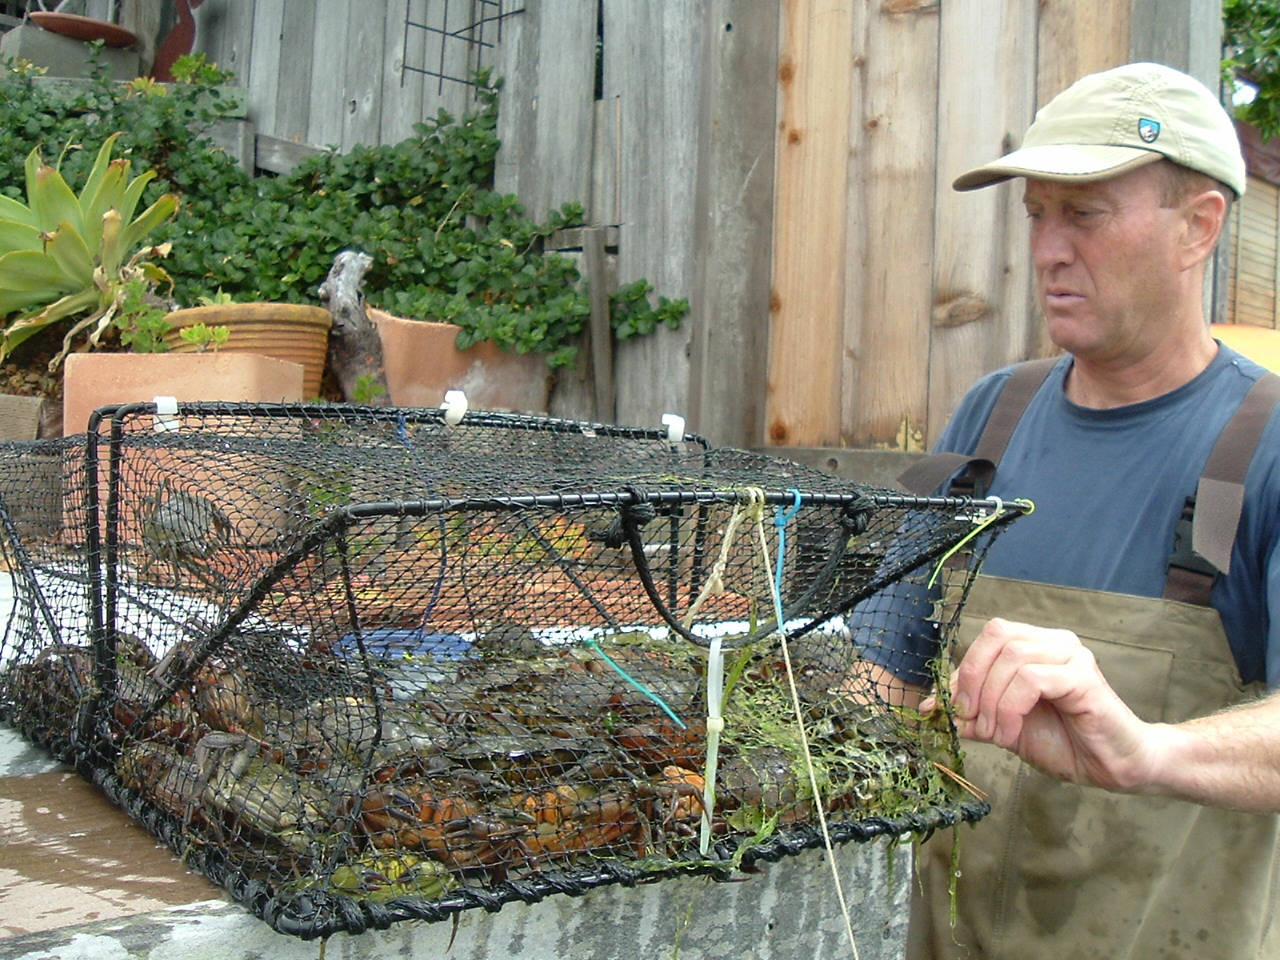 Ted Grosholz with European Green Crabs